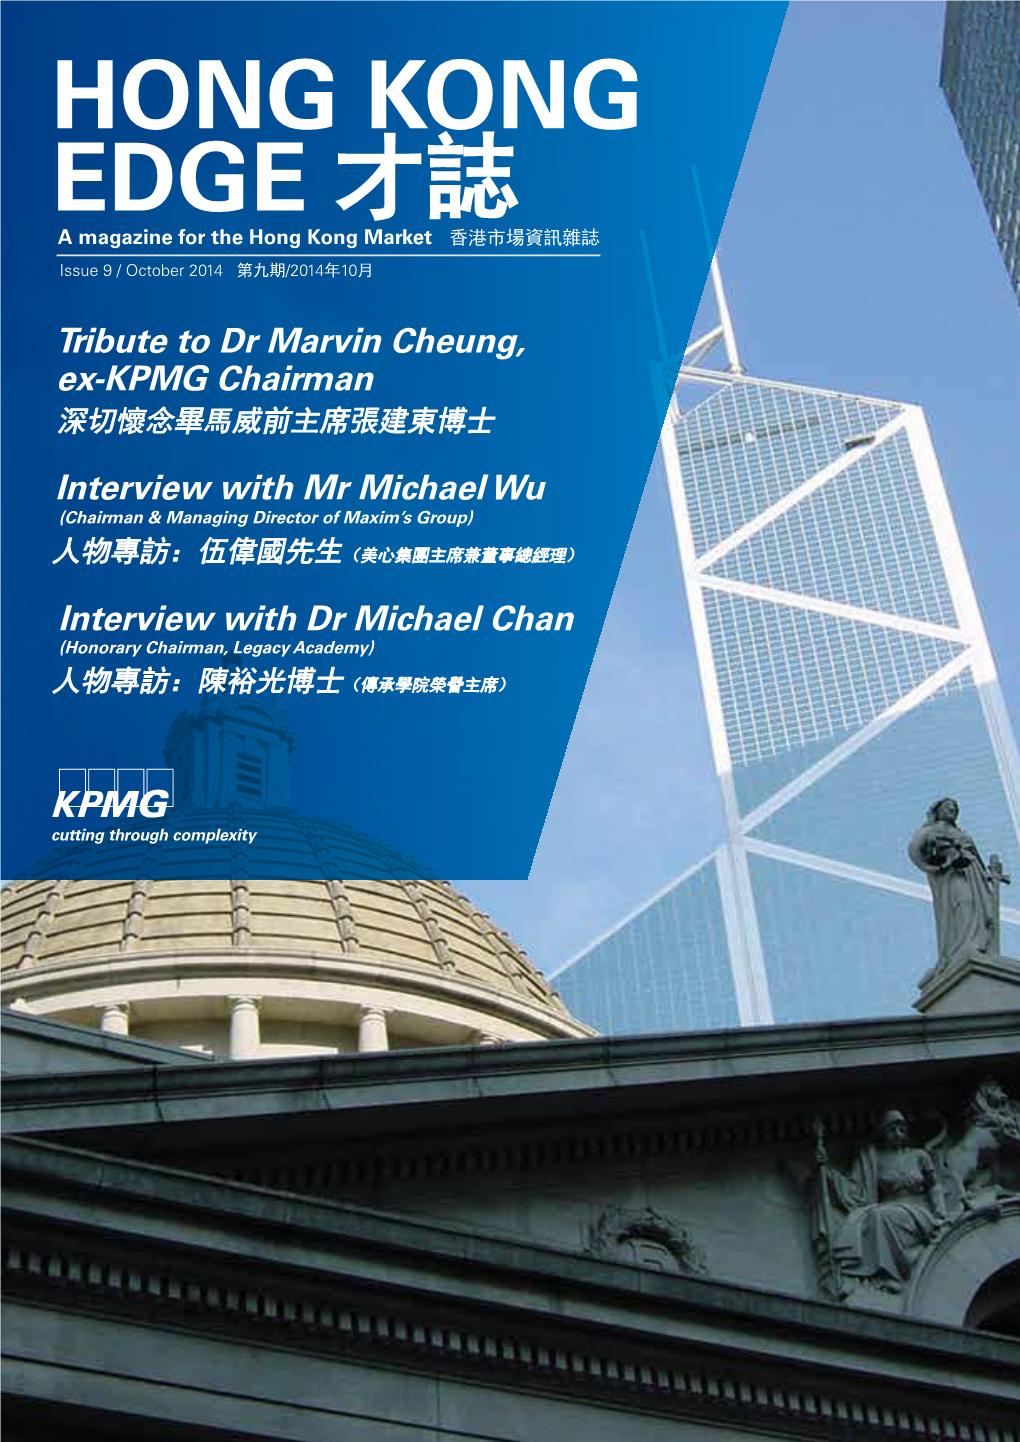 HONG KONG EDGE 才誌 a Magazine for the Hong Kong Market 香港市場資訊雜誌 Issue 9 / October 2014 第九期/2014年10月